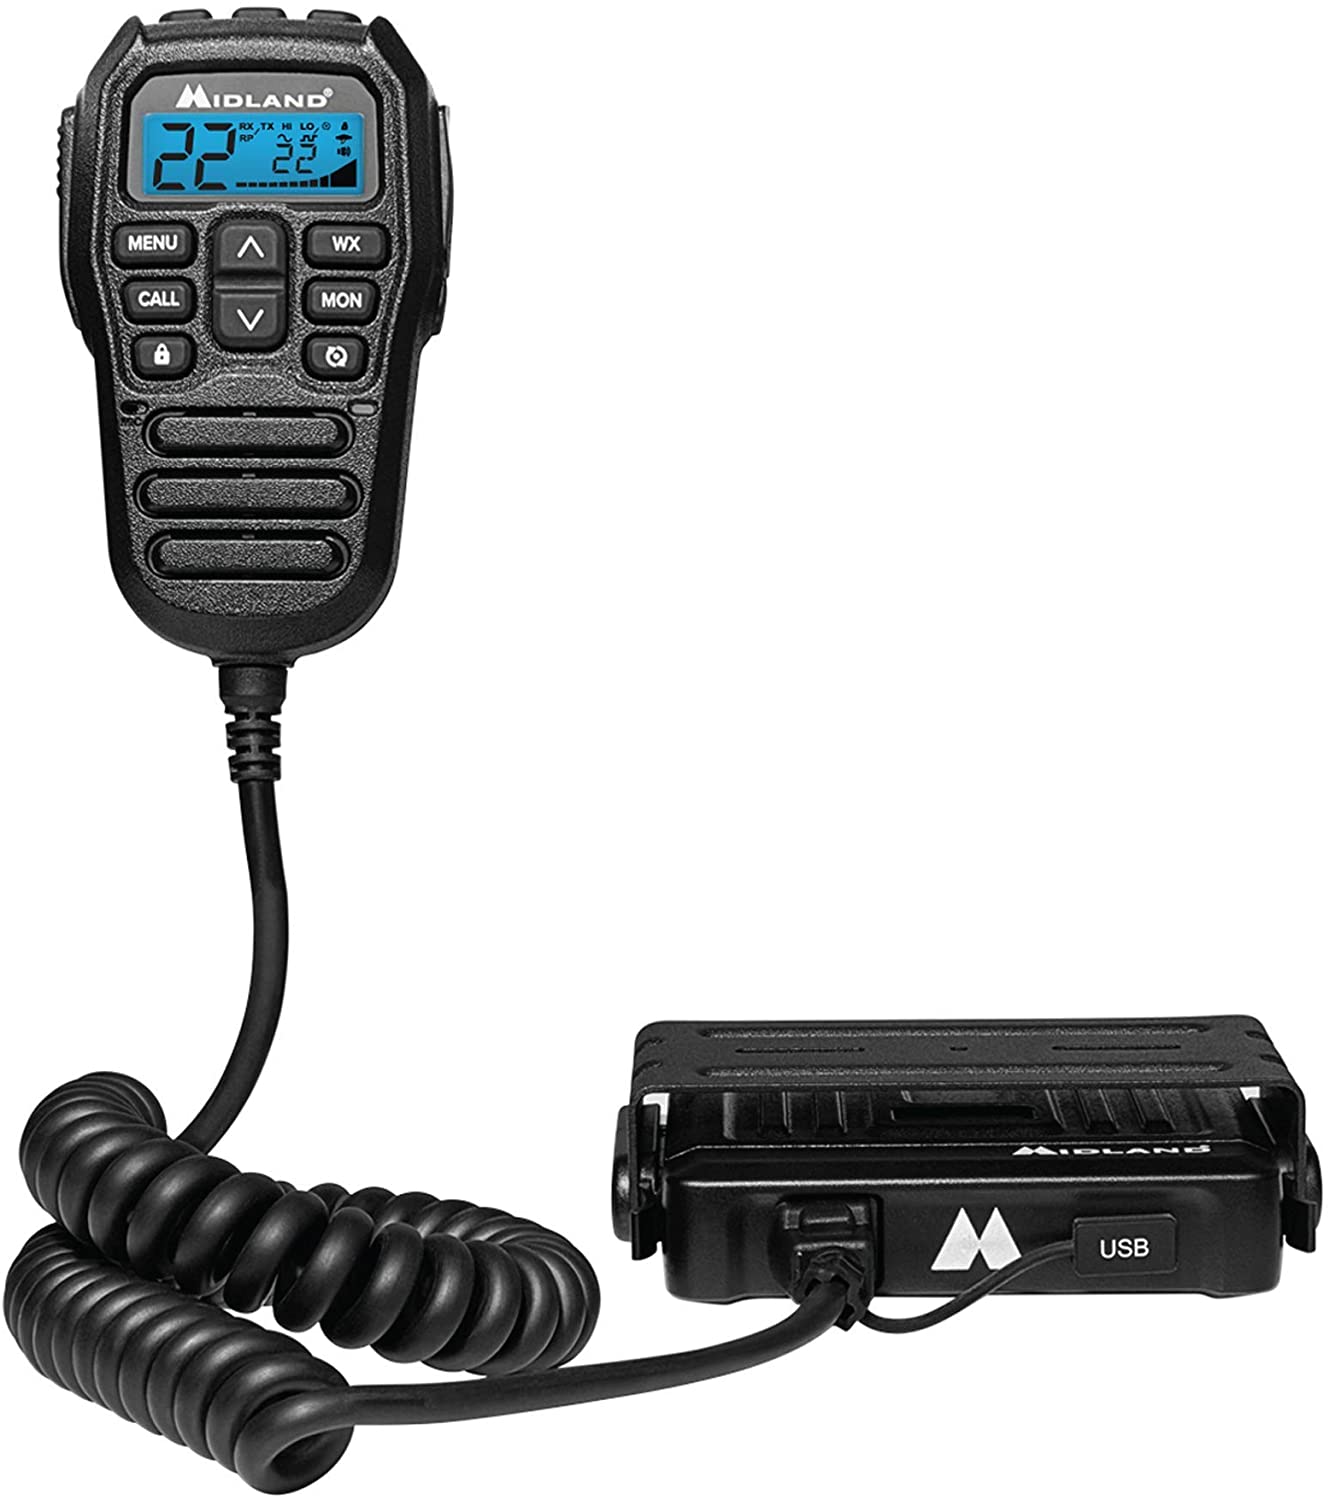 MIDLAND Micro Mobile GMRS 2-Way Radio Owner’s Manual